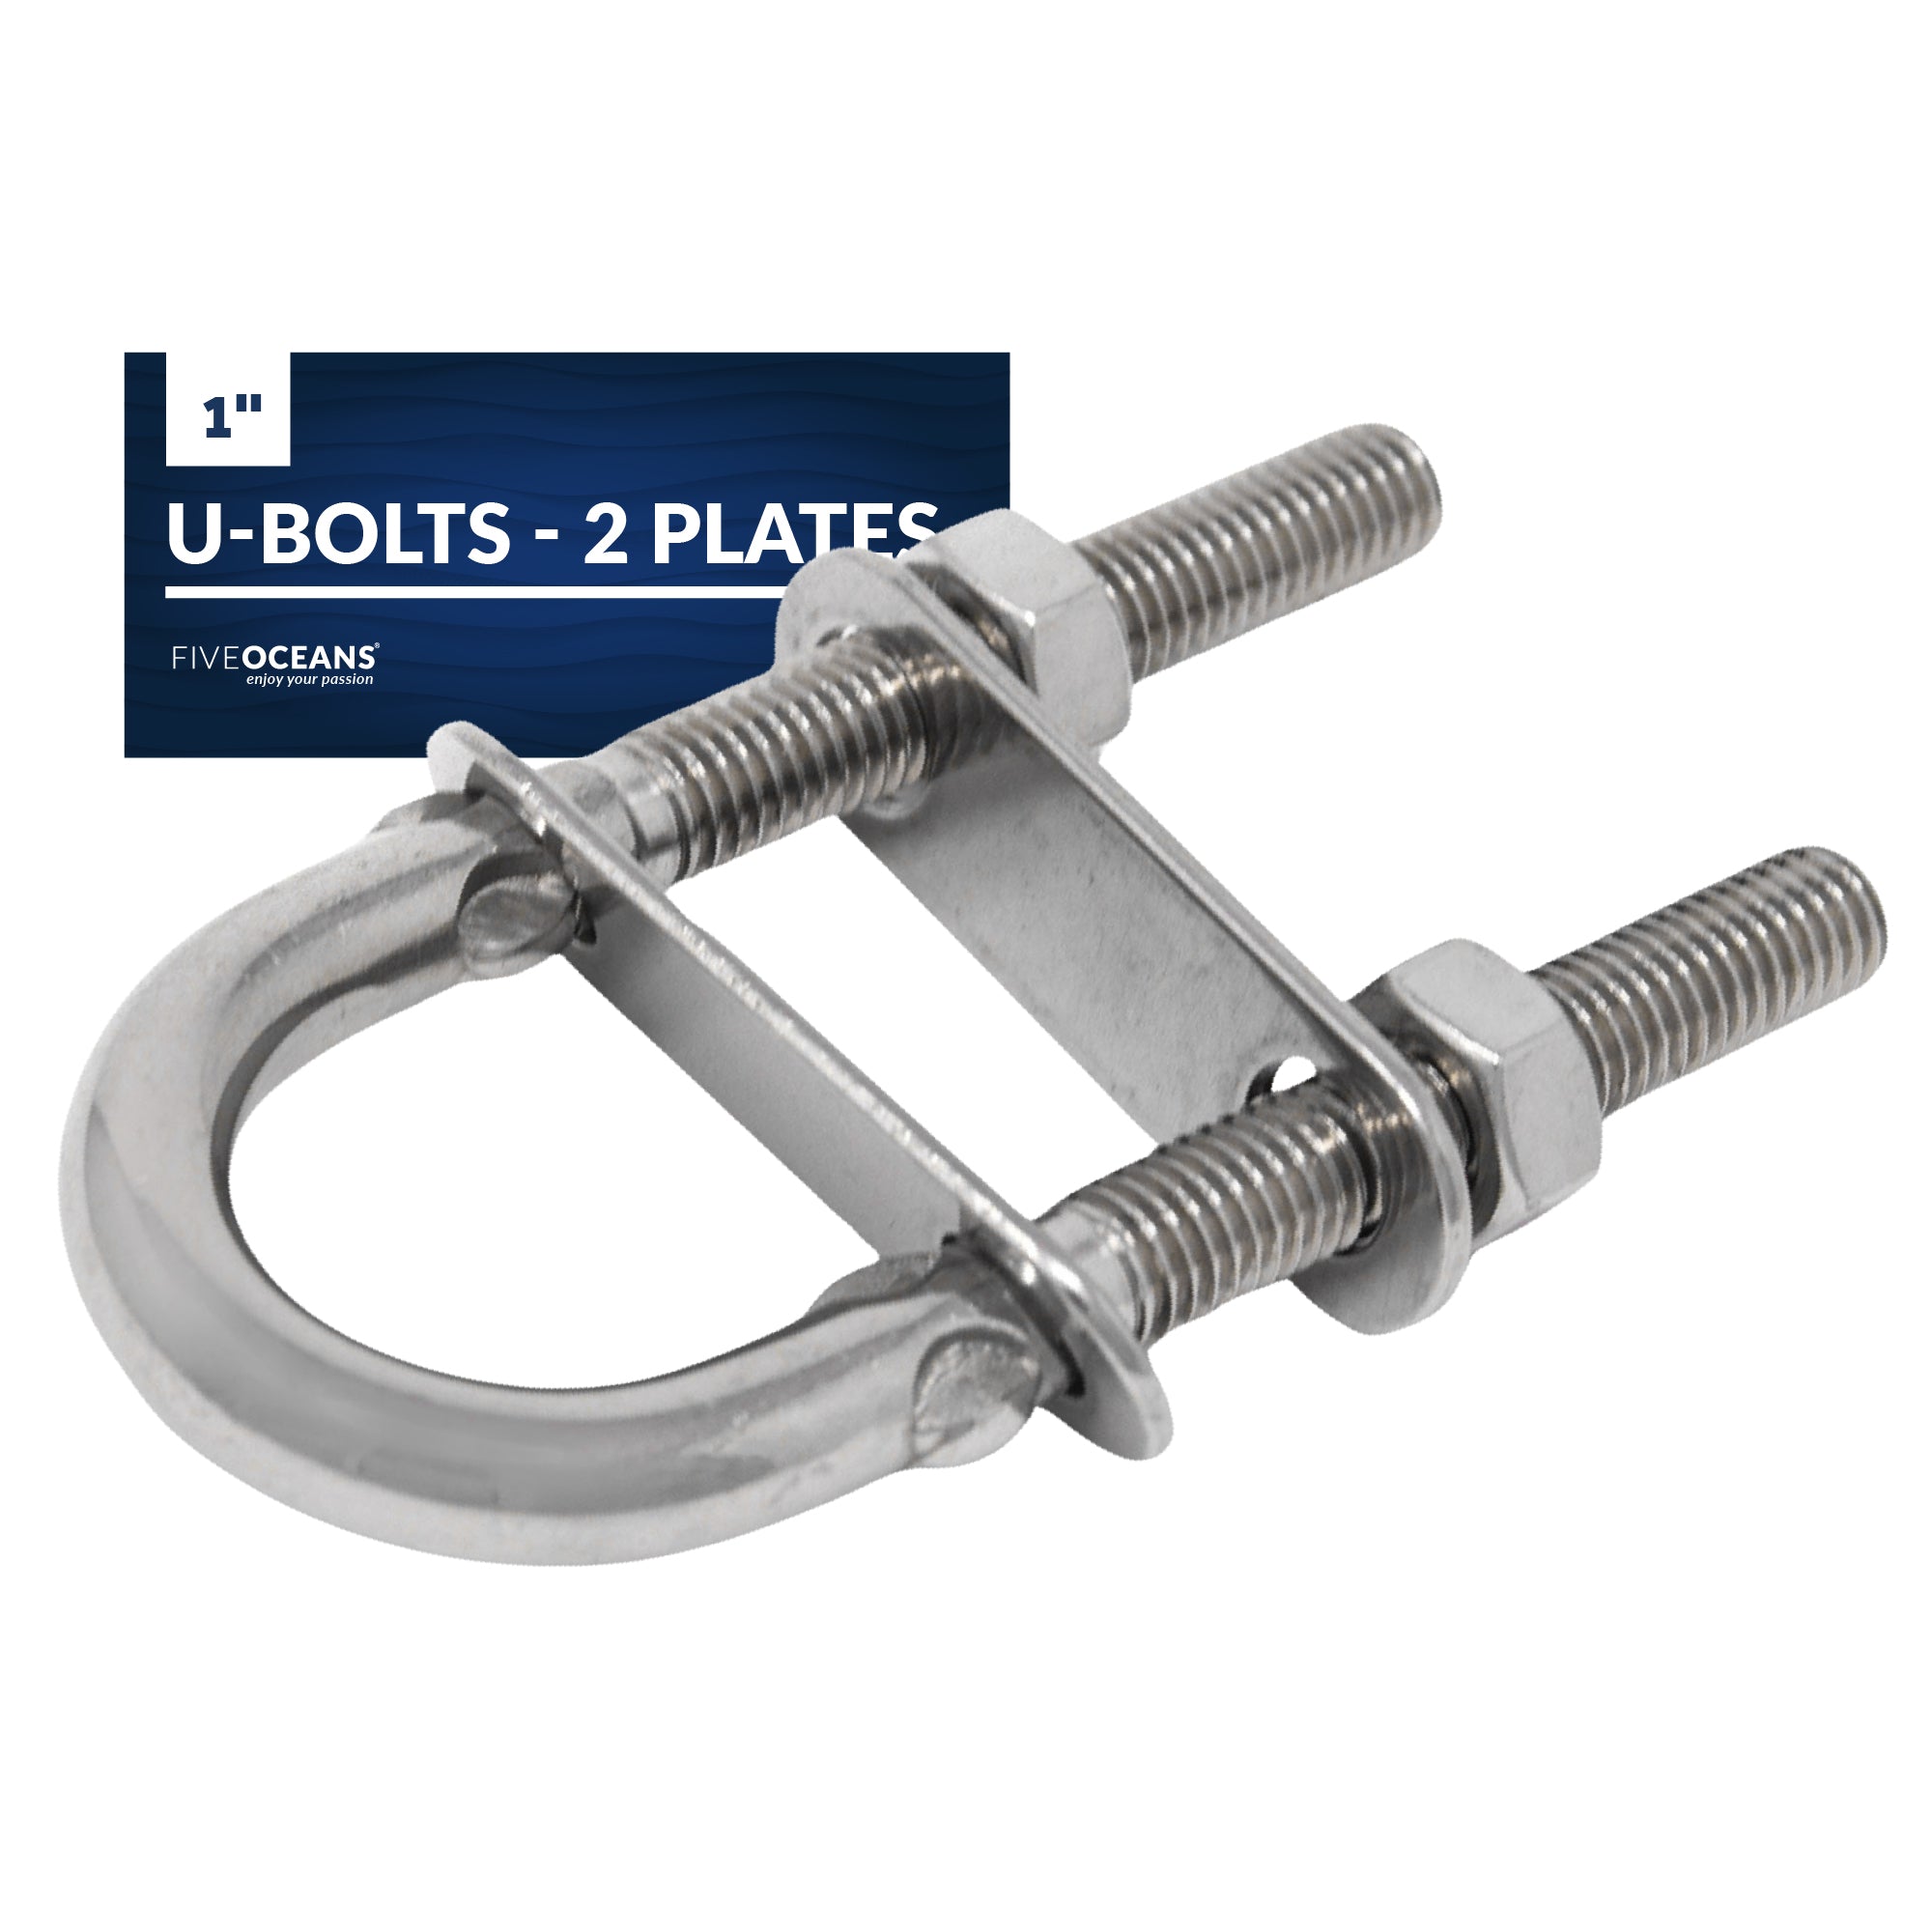 U-Bolts with 2 plates, Stainless Steel, 3-25/64" - FO4187